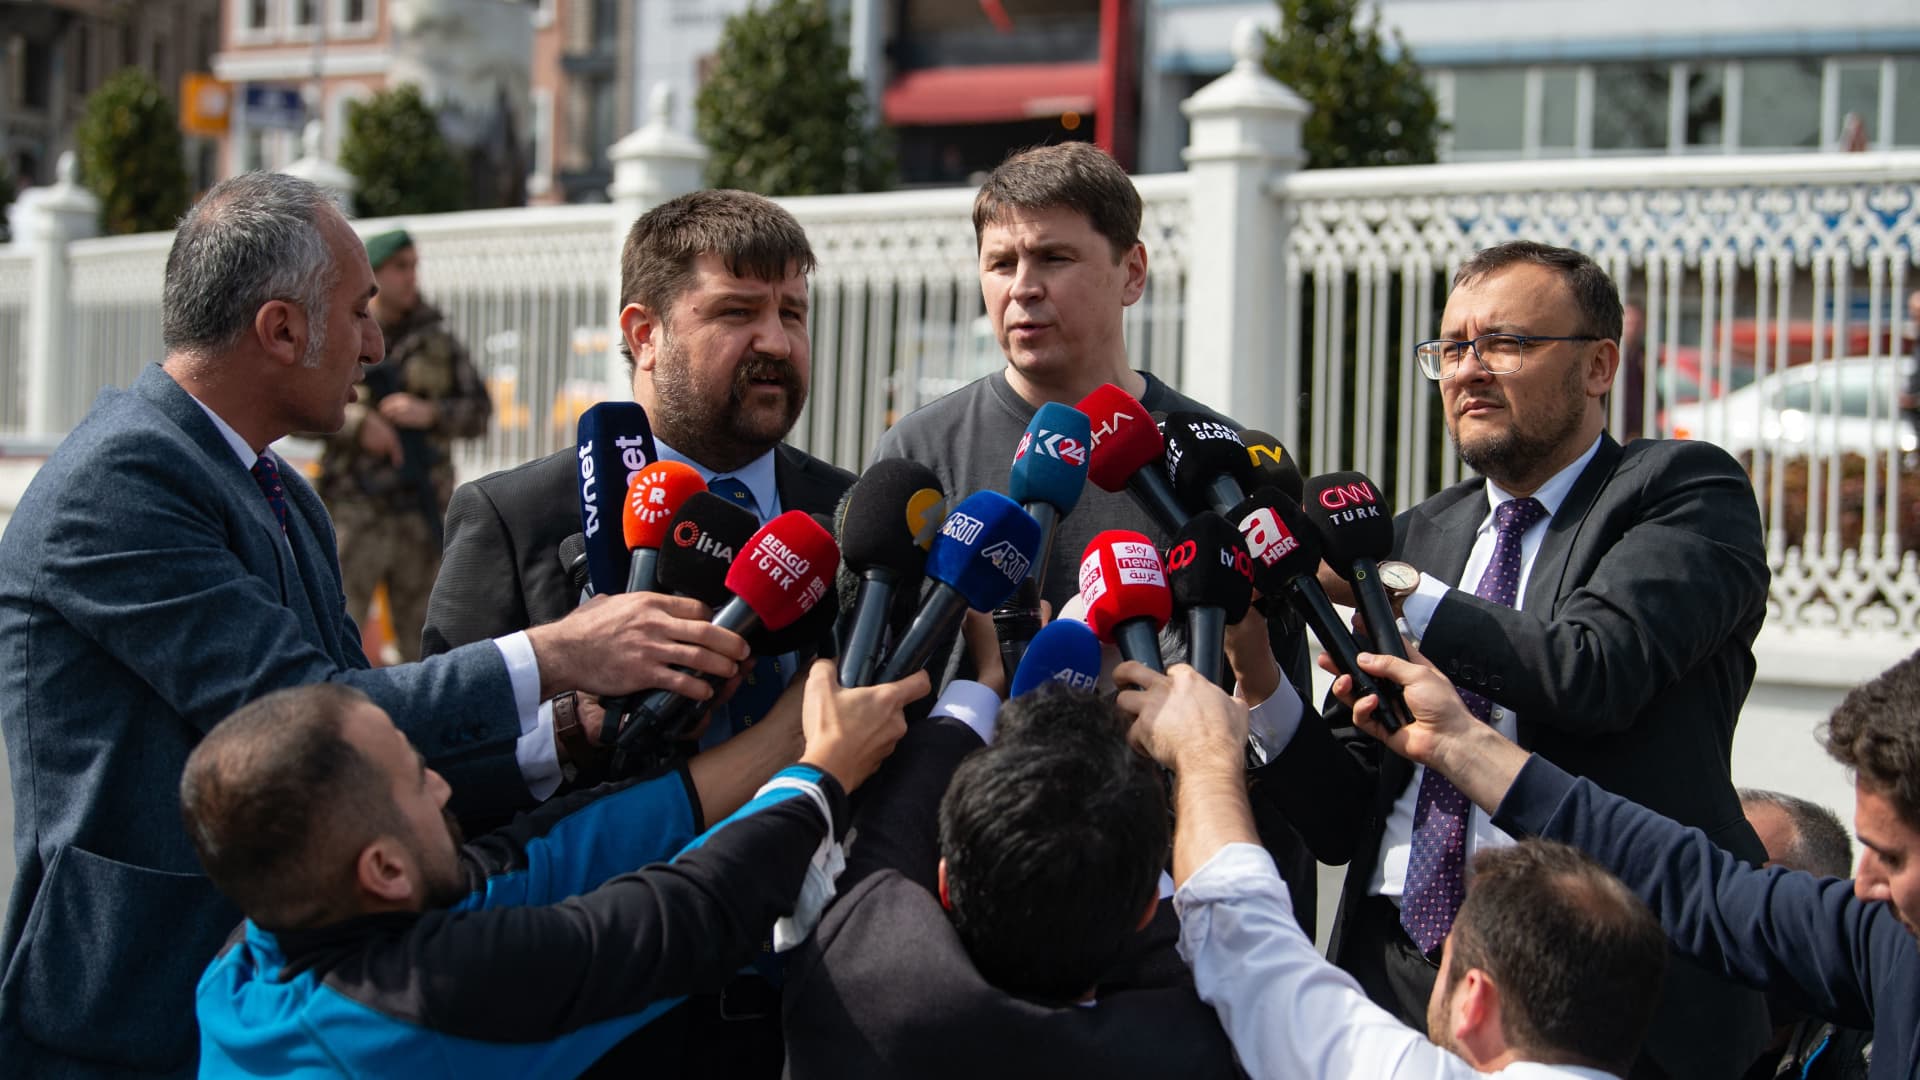 Ukrainian presidential adviser Mykhailo Podolyak (C) speaks to the press after first Russia and Ukraine face-to-face talks in weeks at Dolmabahce palace in Istanbul, on March 29, 2022, to end the nearly five-week-old war which has killed an estimated 20,000 people.